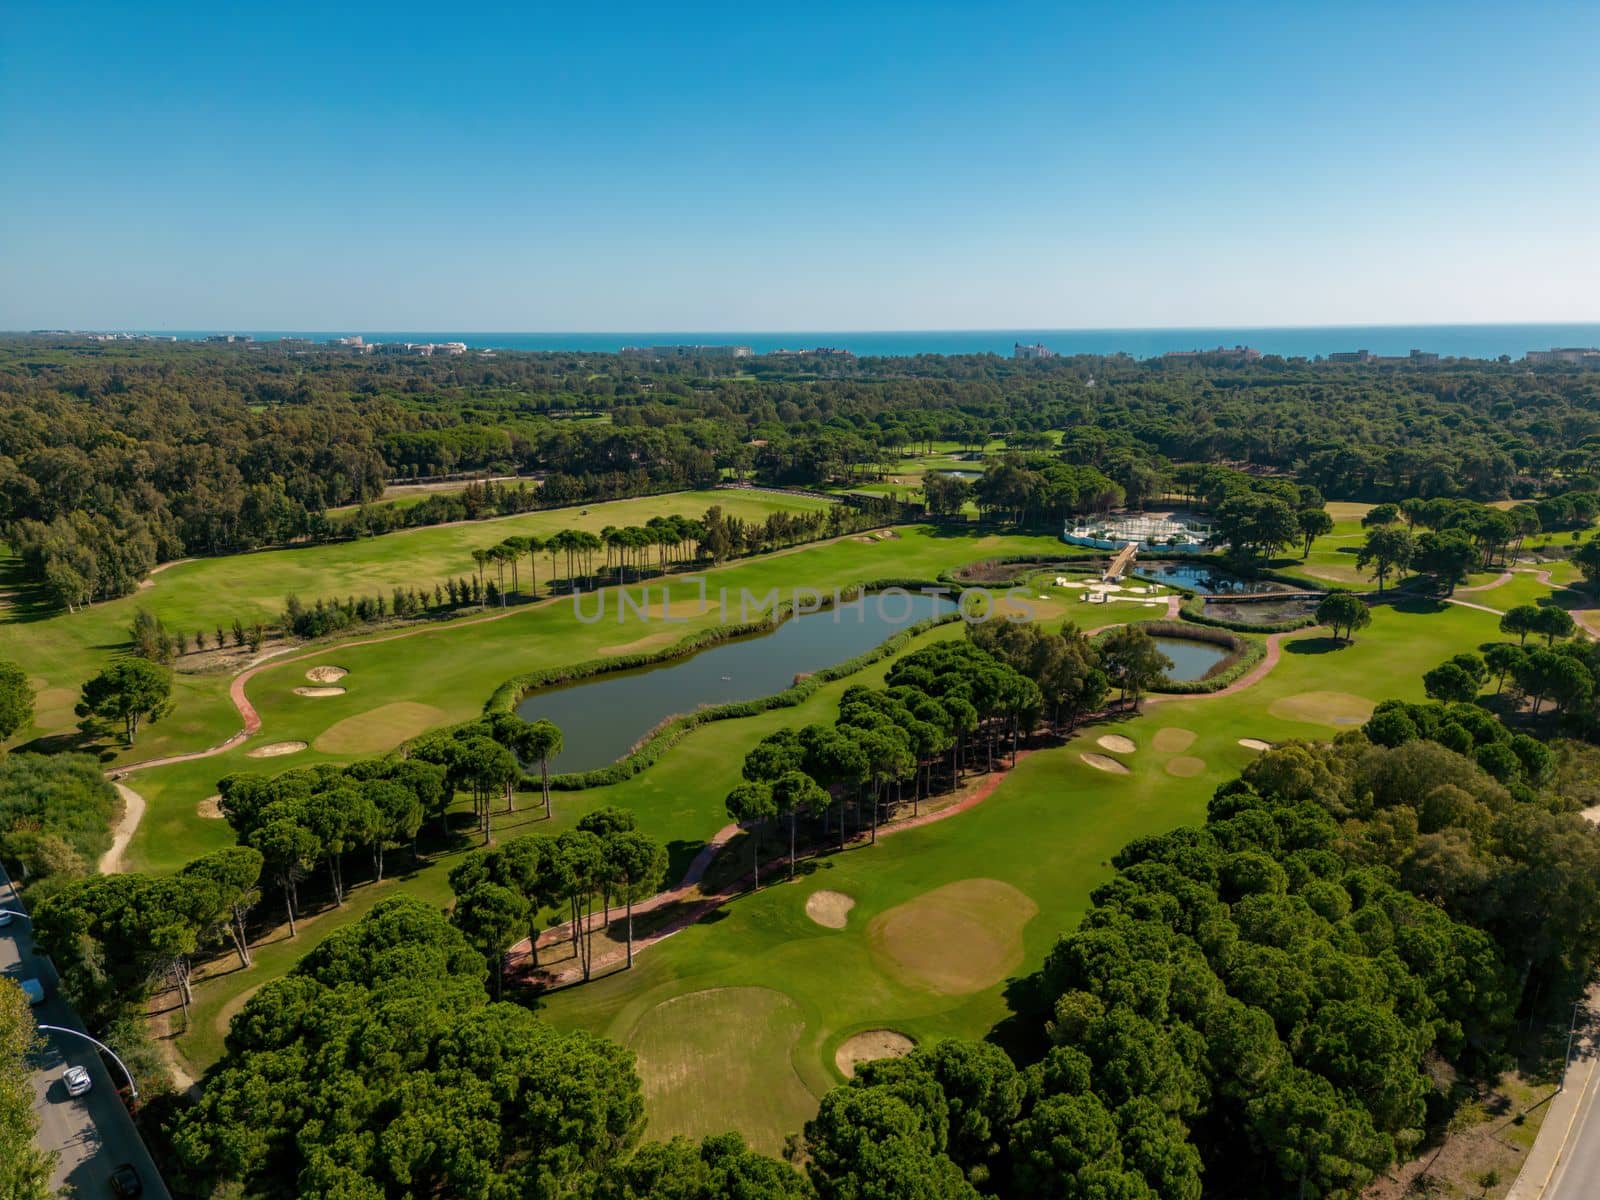 Aerial view of the golf course in Antalya Belek at sunset by Sonat